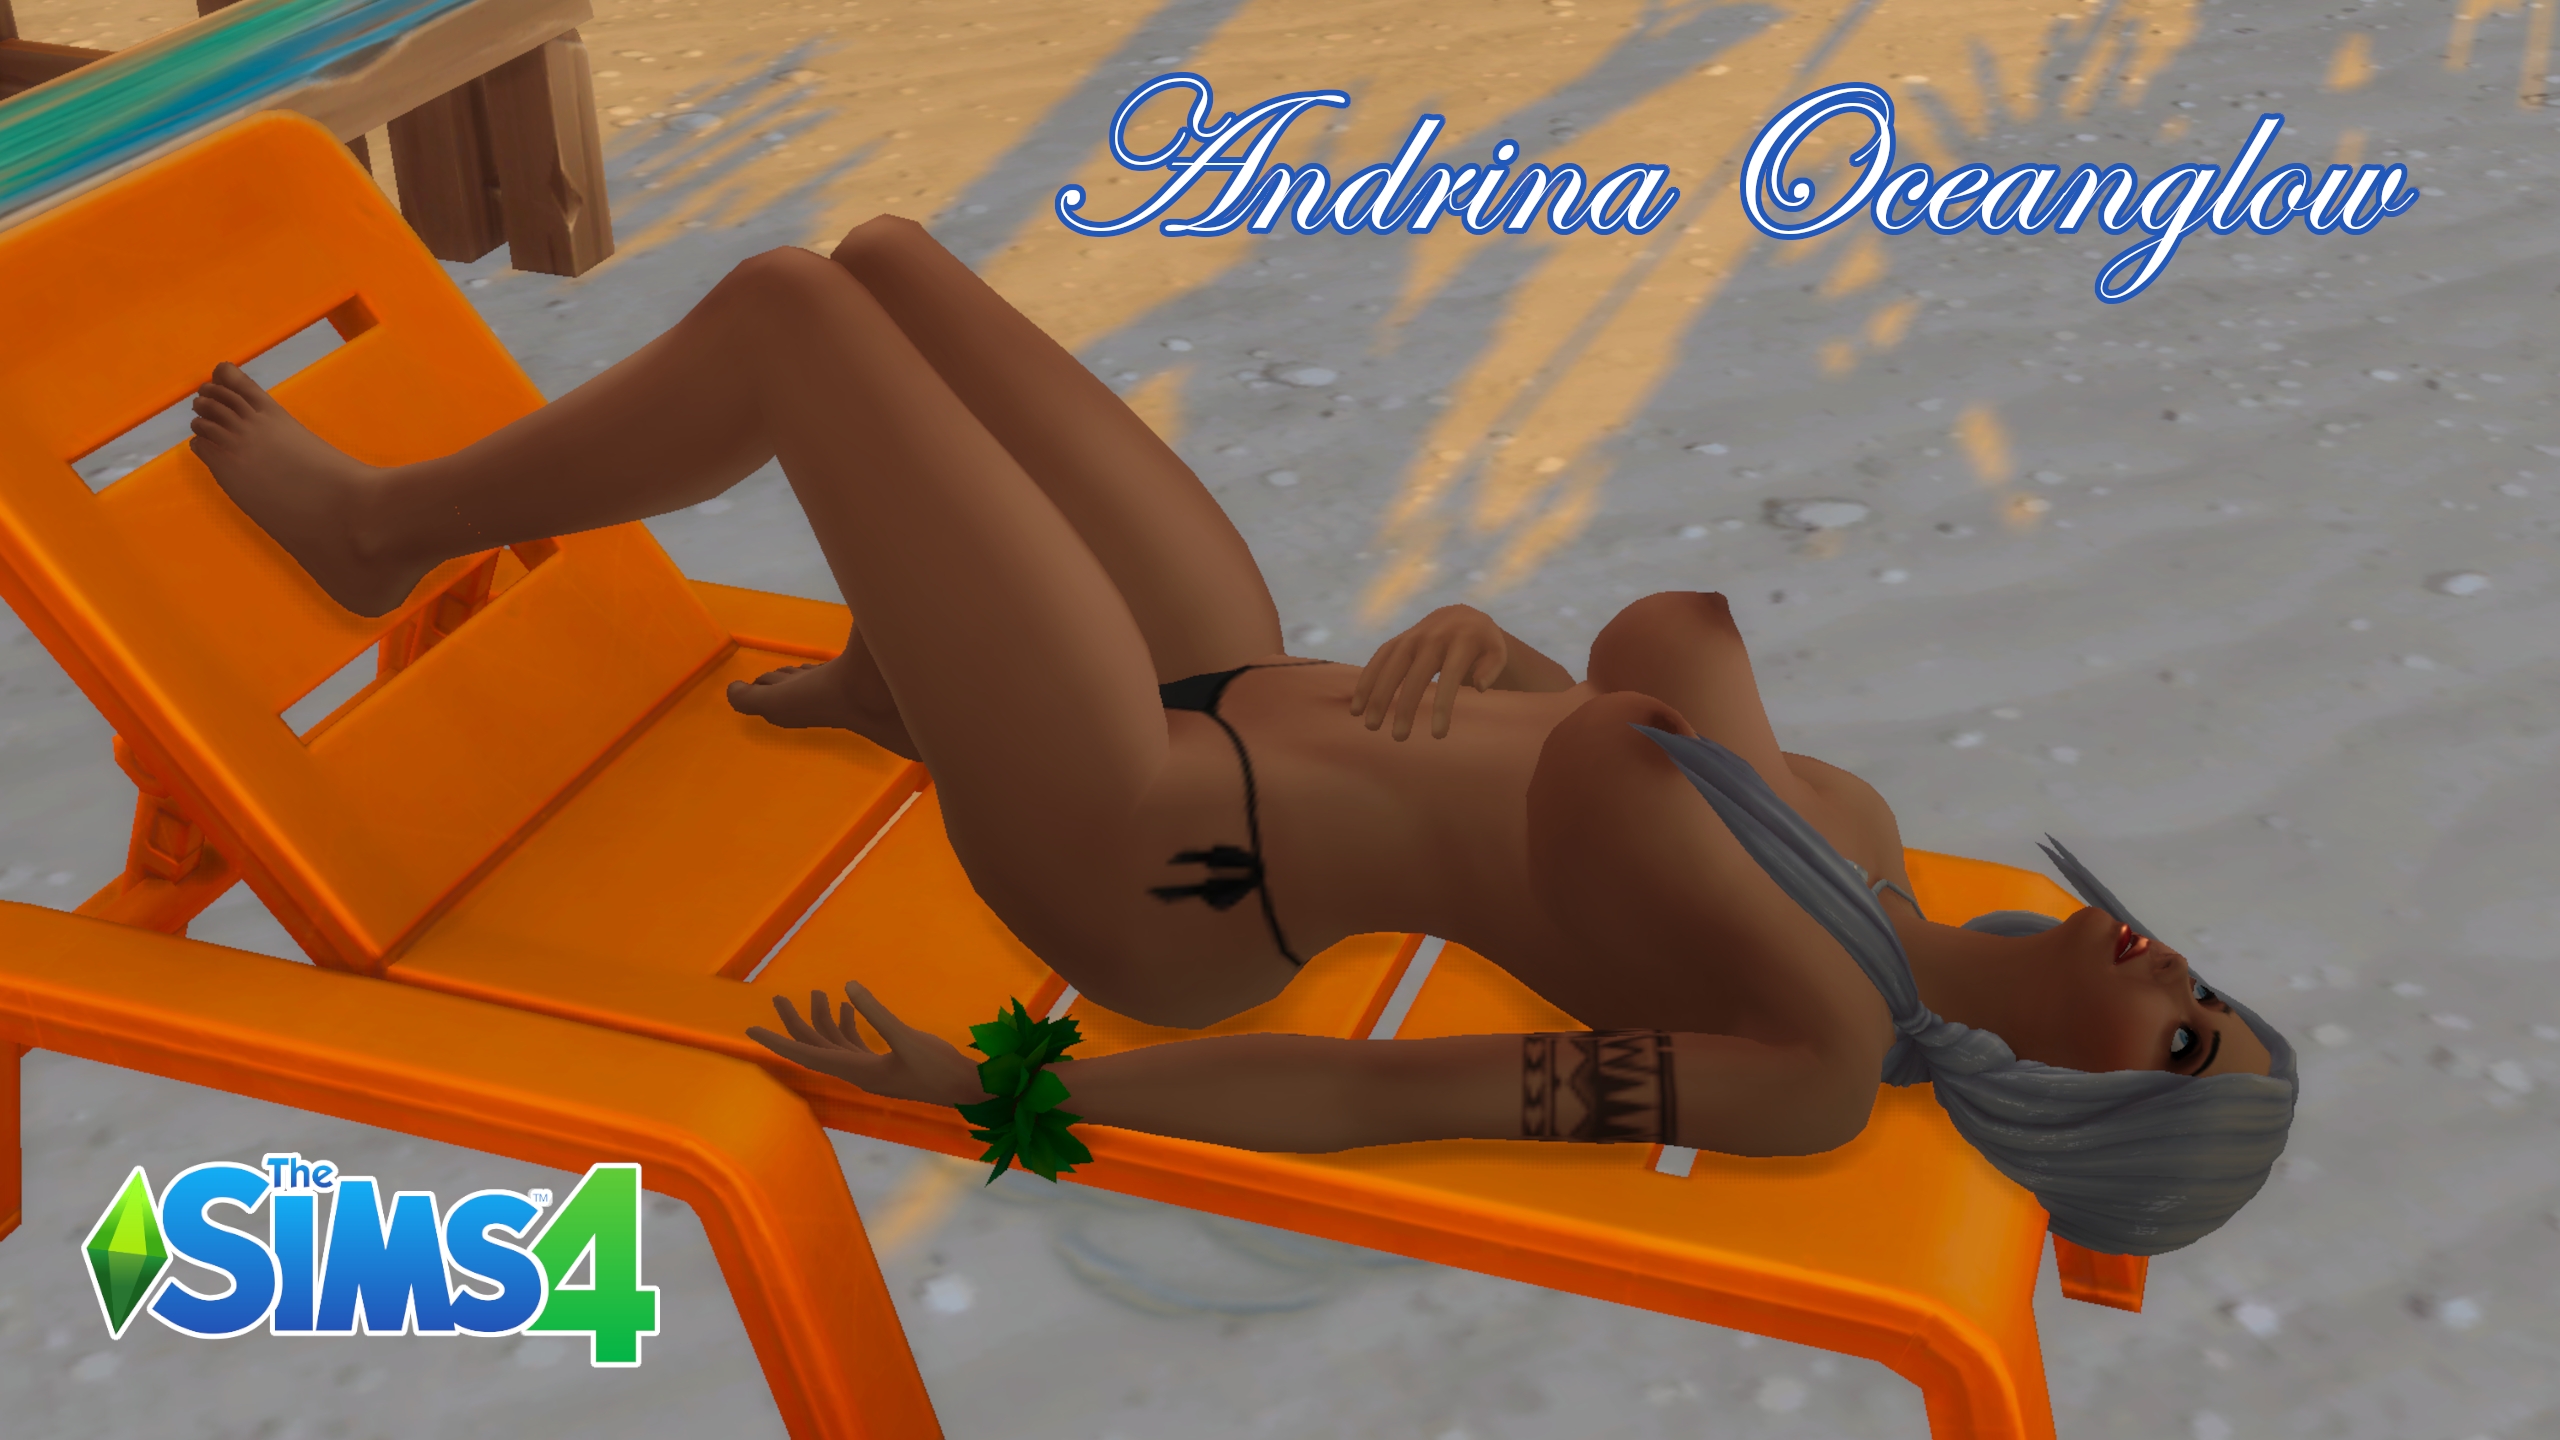 Sims 4 - Mermaid Andrina Oceanglow The Sims 4 Mermaid Siren White Hair Bustyfemale Thong Big Ass Toned Female Topless 8